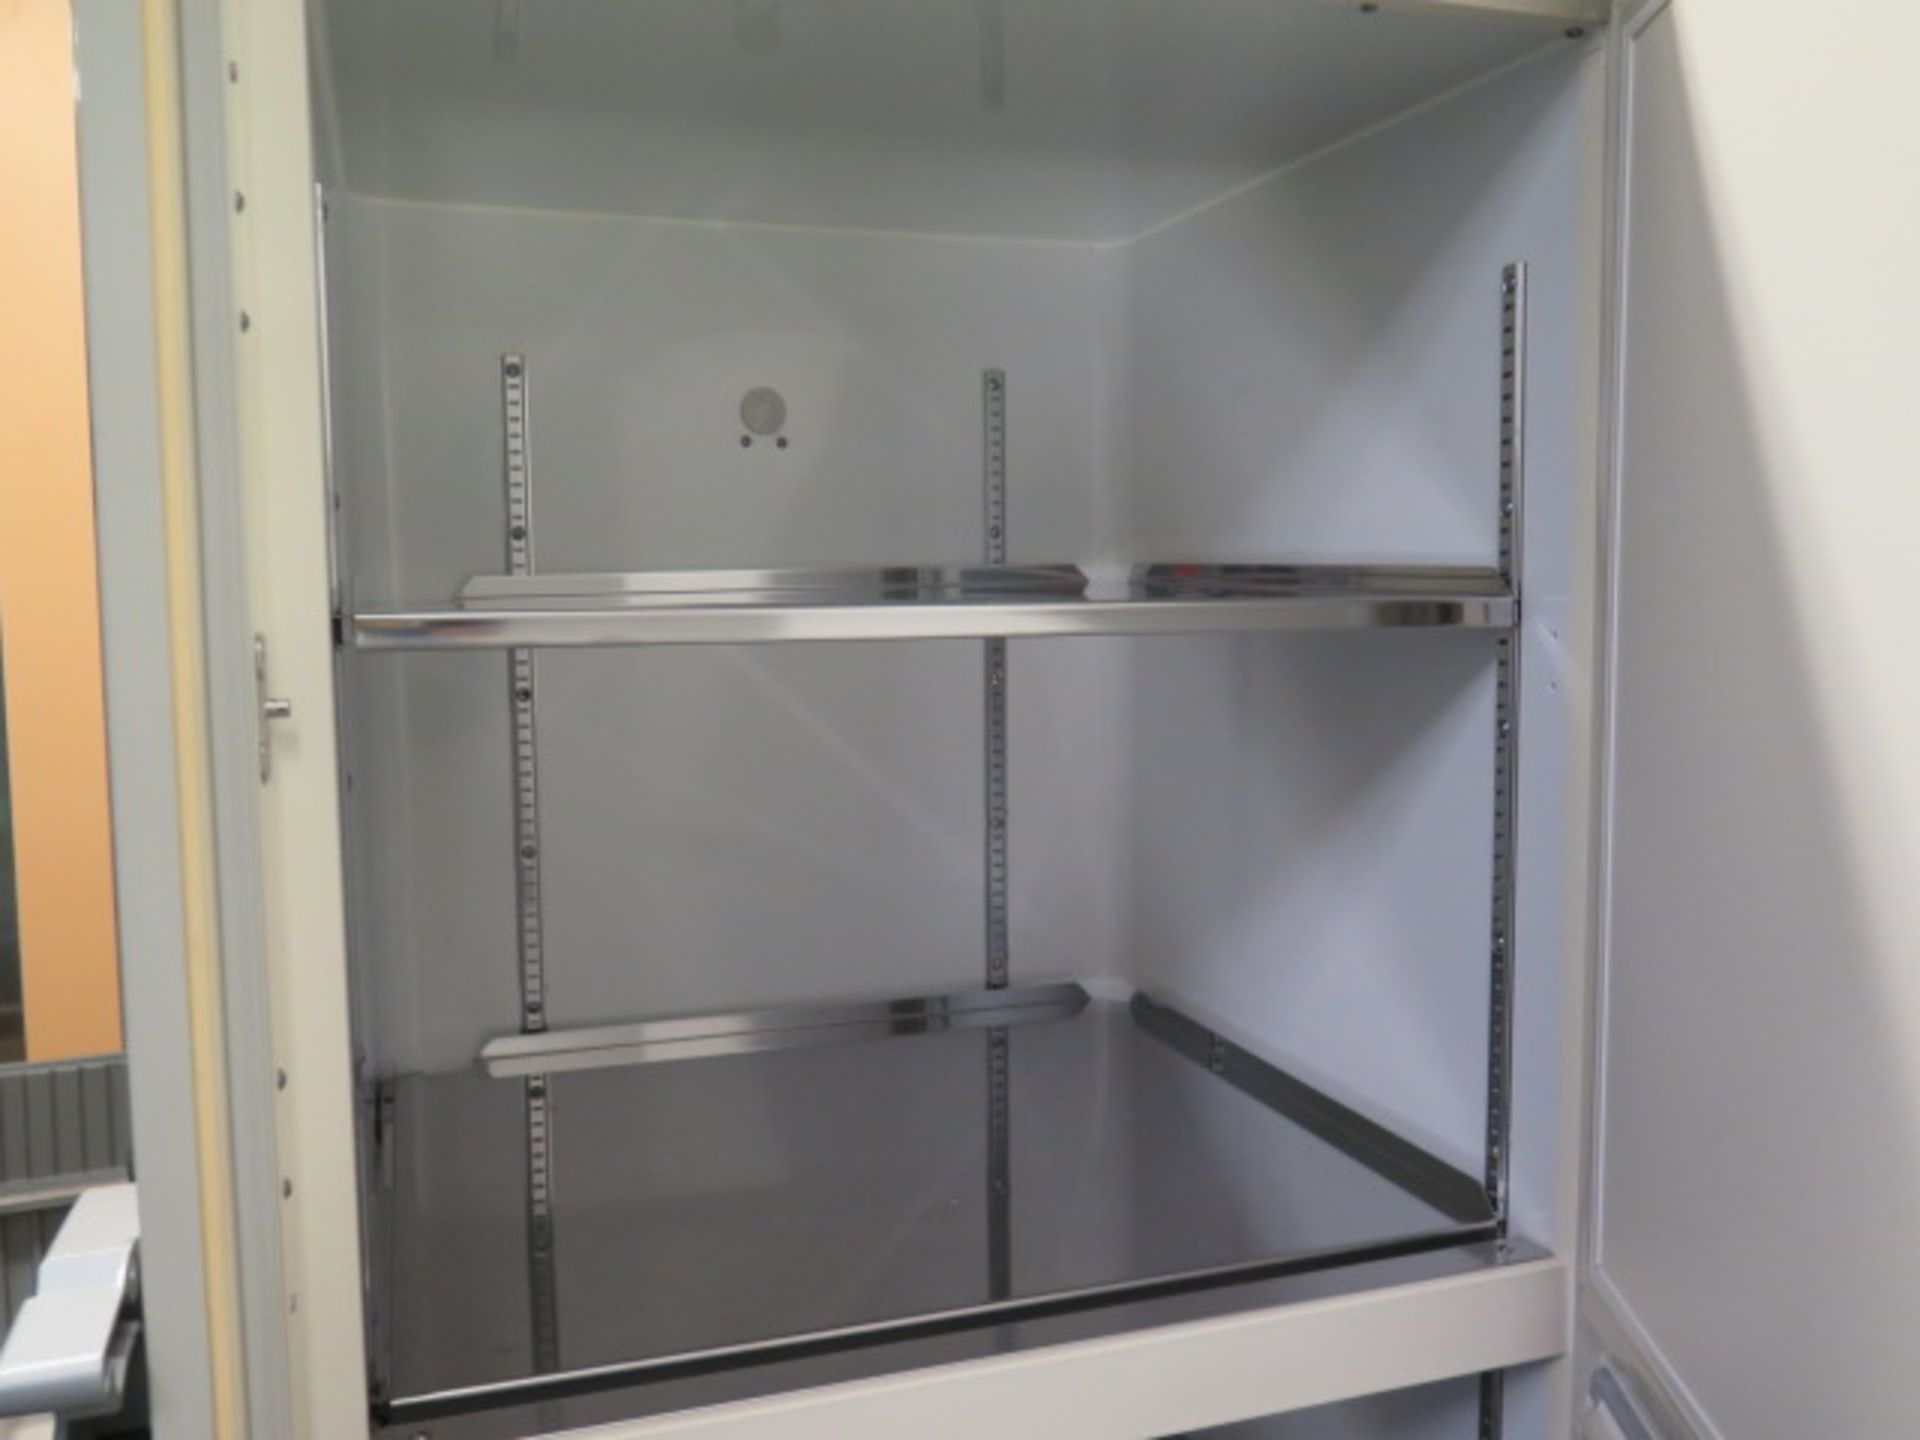 Sanyo “Ultra Low” VIP Series mdl. MDF-U52VC -86 Degree C Laboratory Freezer s/n 50709004 (SOLD AS-IS - Image 6 of 12